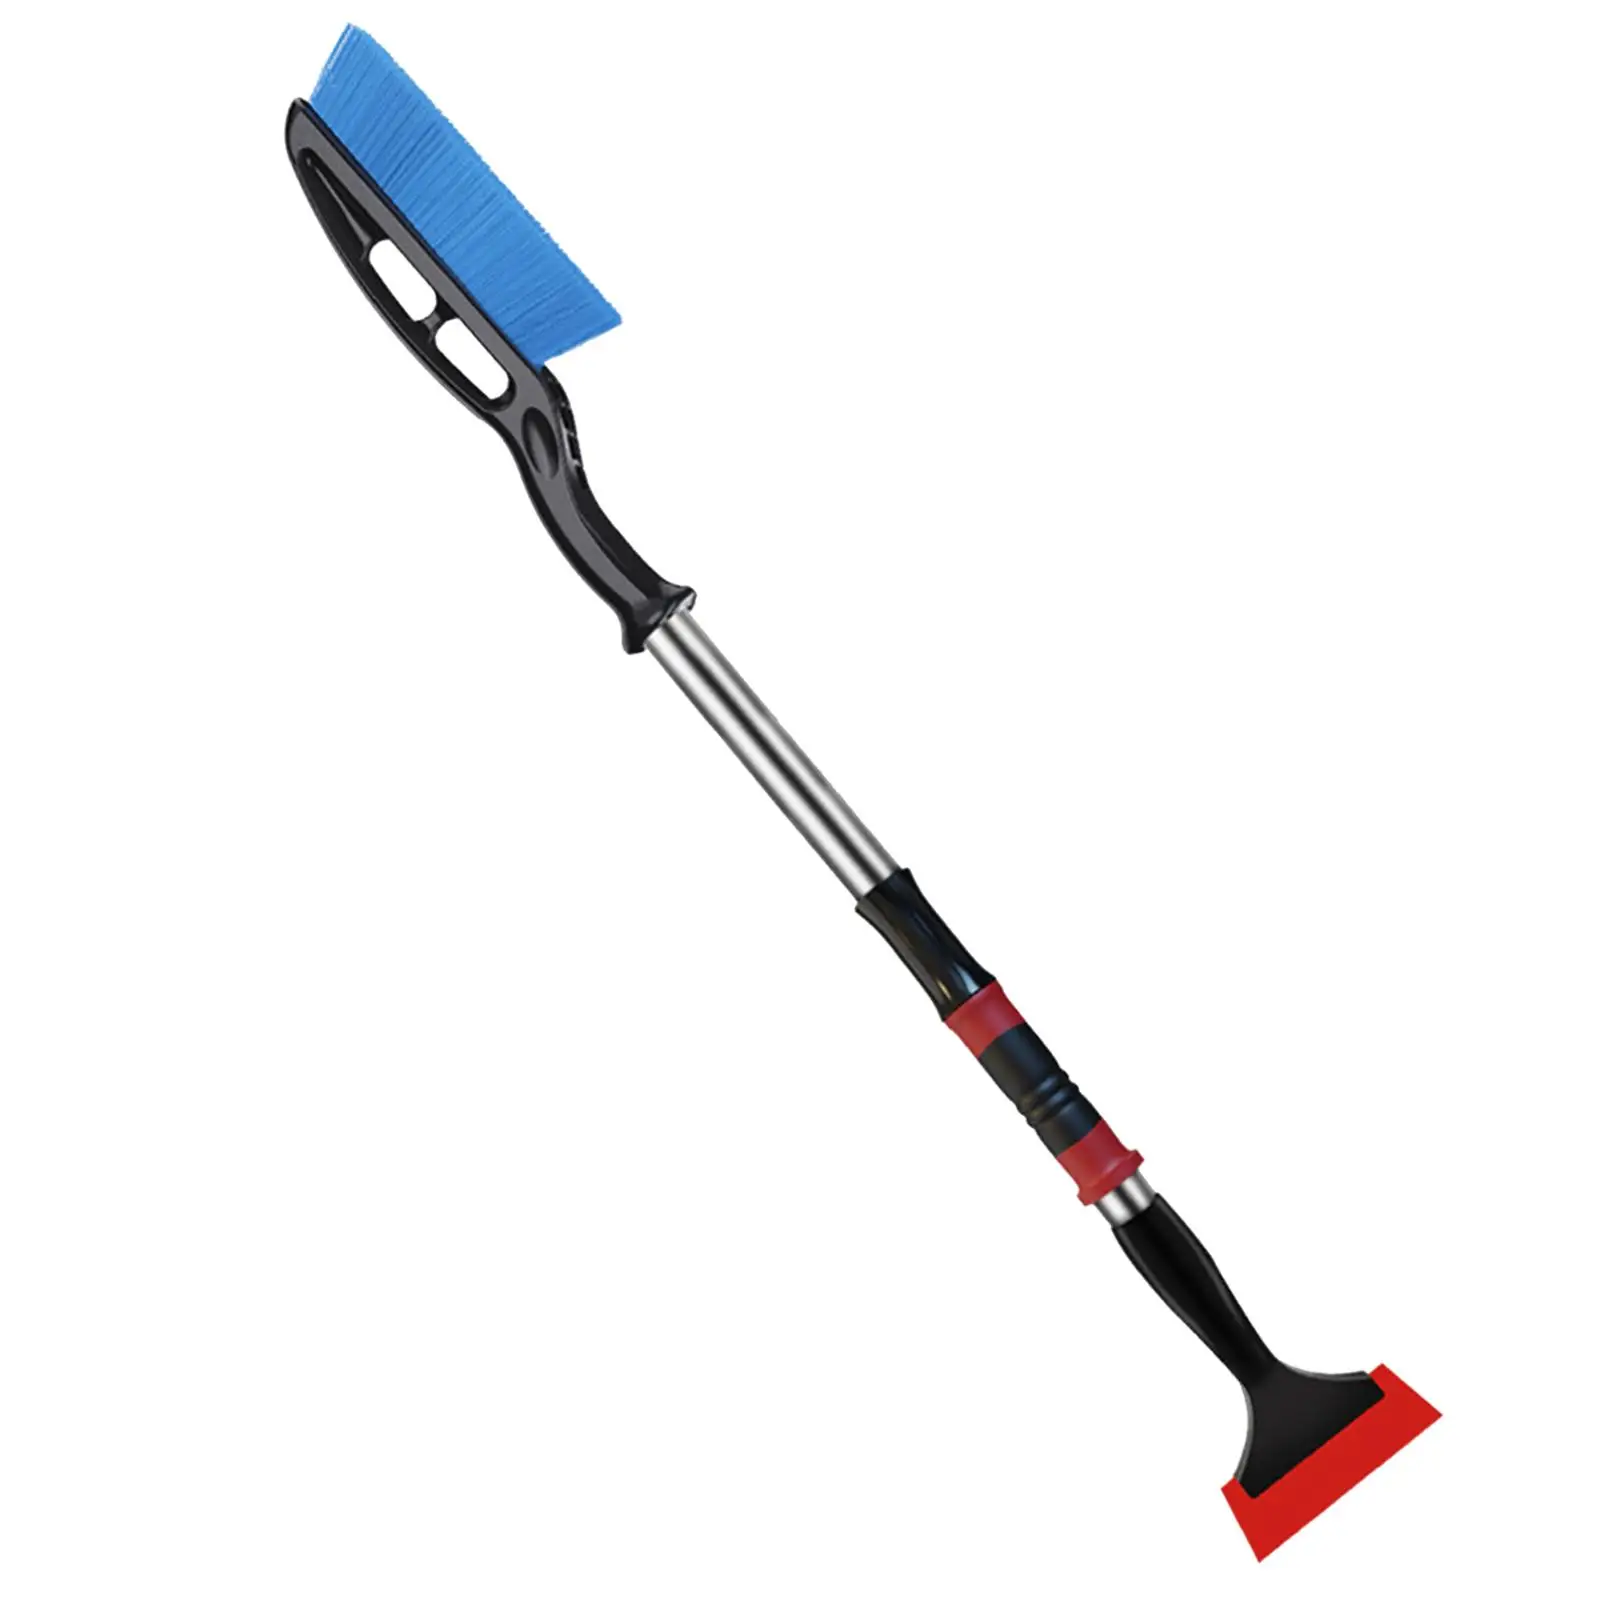 Car Snow Removal Brush Shovel Lightweight Snow Cleaning for Windows SUV